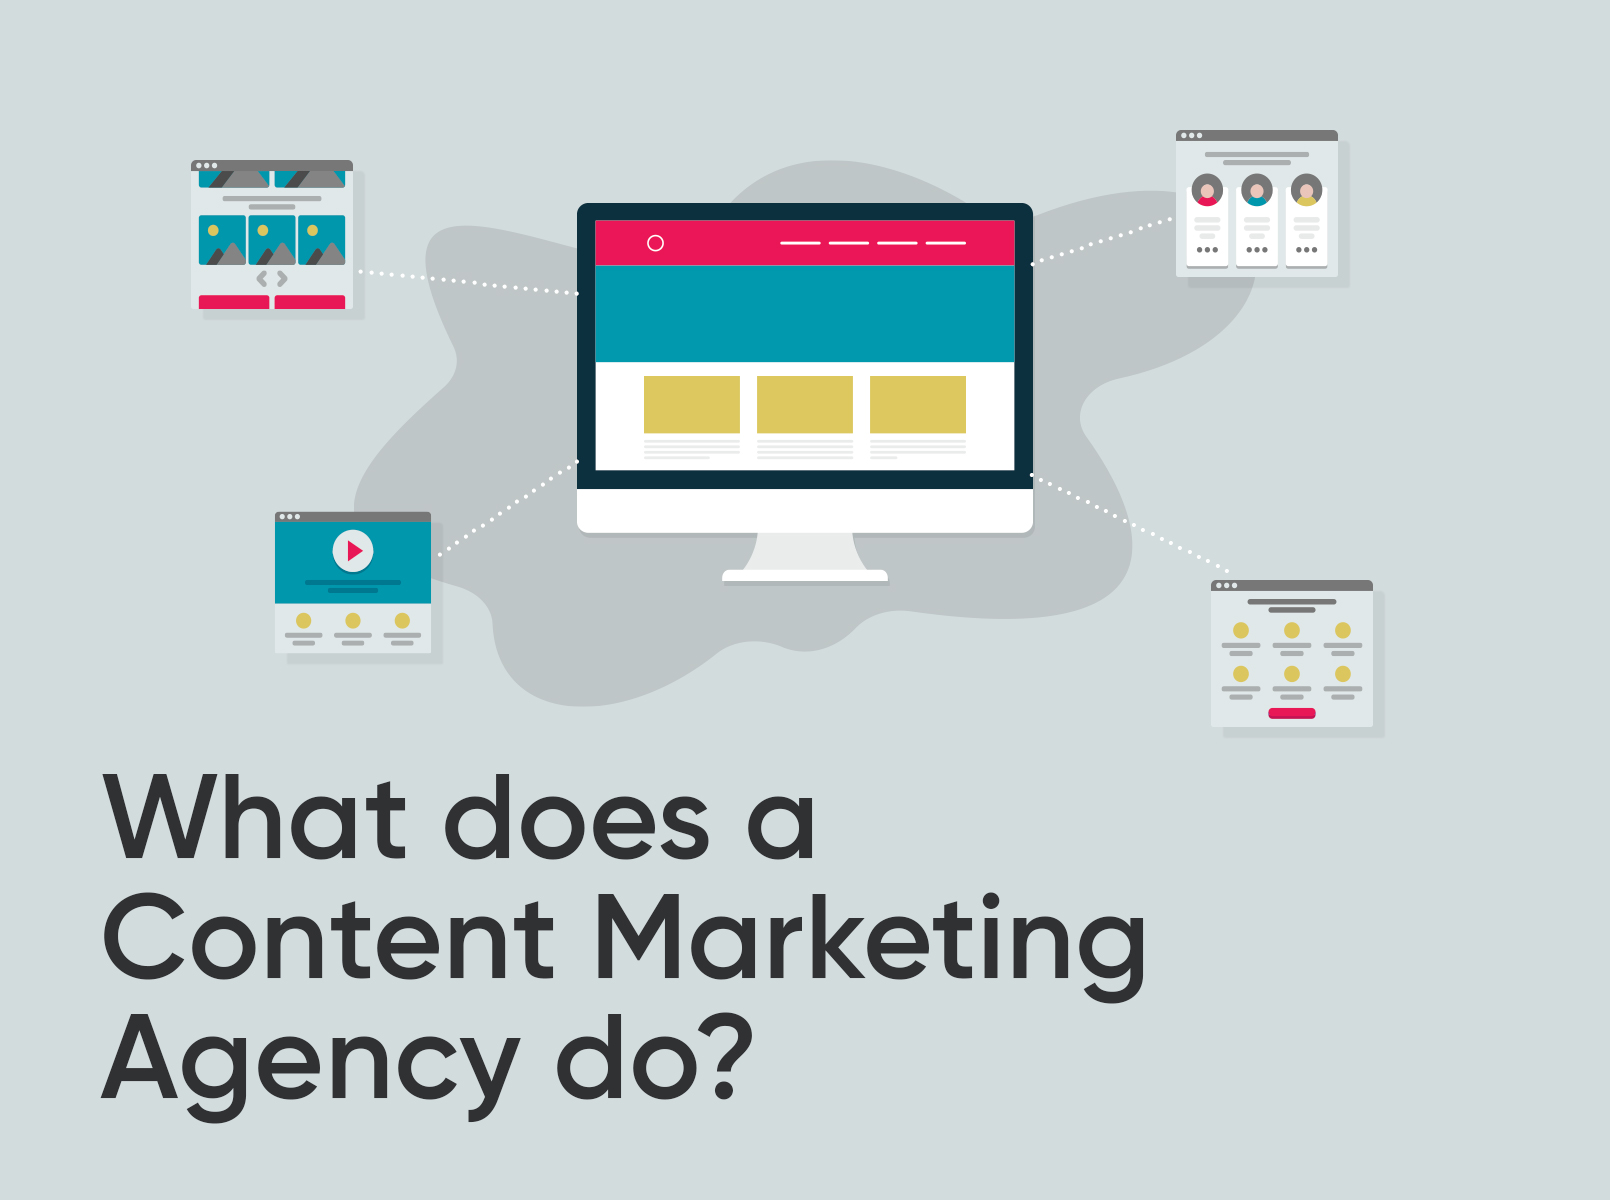 What does a Content Marketing Agency do?